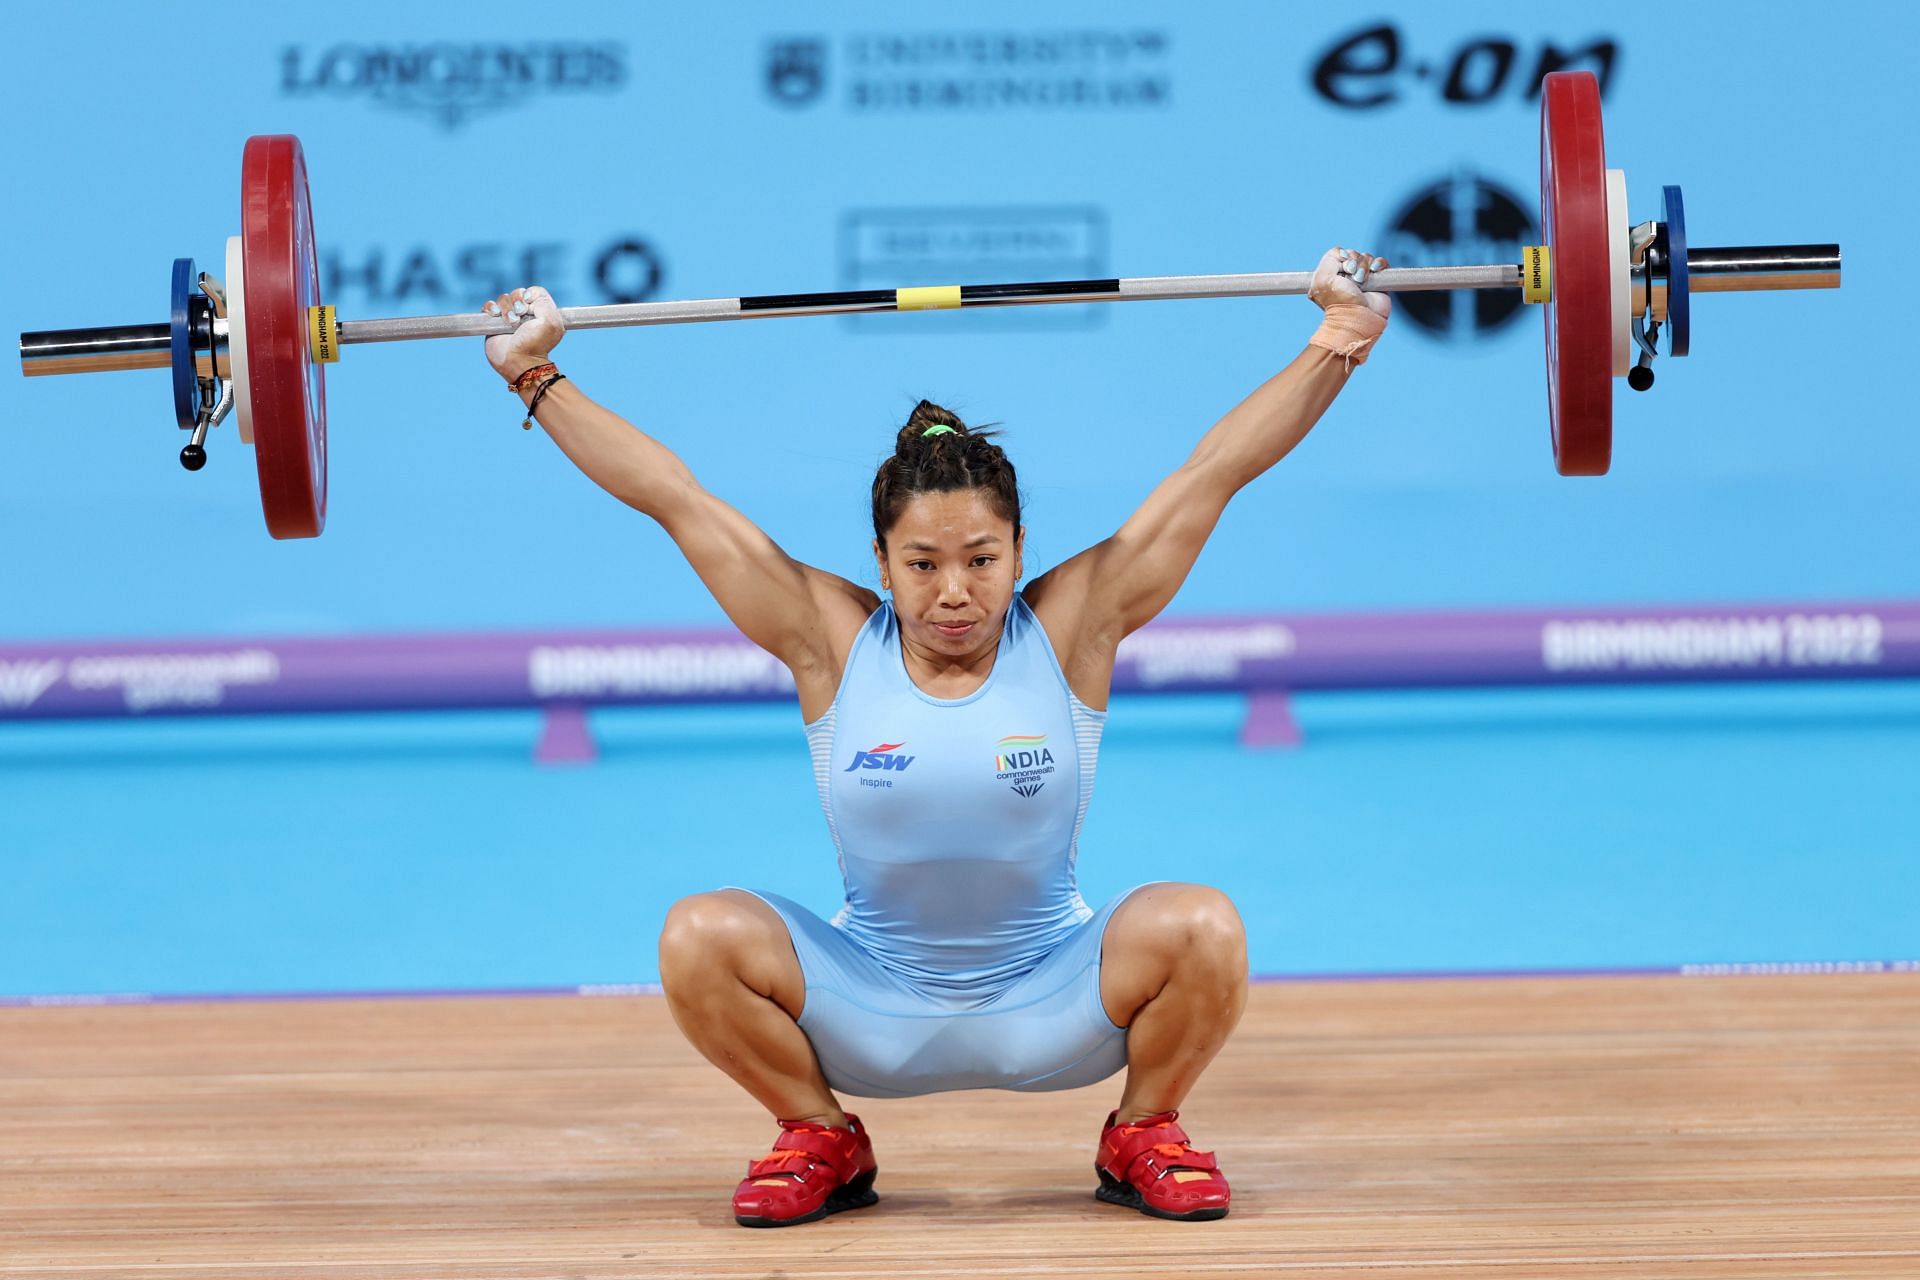 My entire focus was on snatch and I gave my best, says CWG 2022 gold medalist Mirabai Chanu